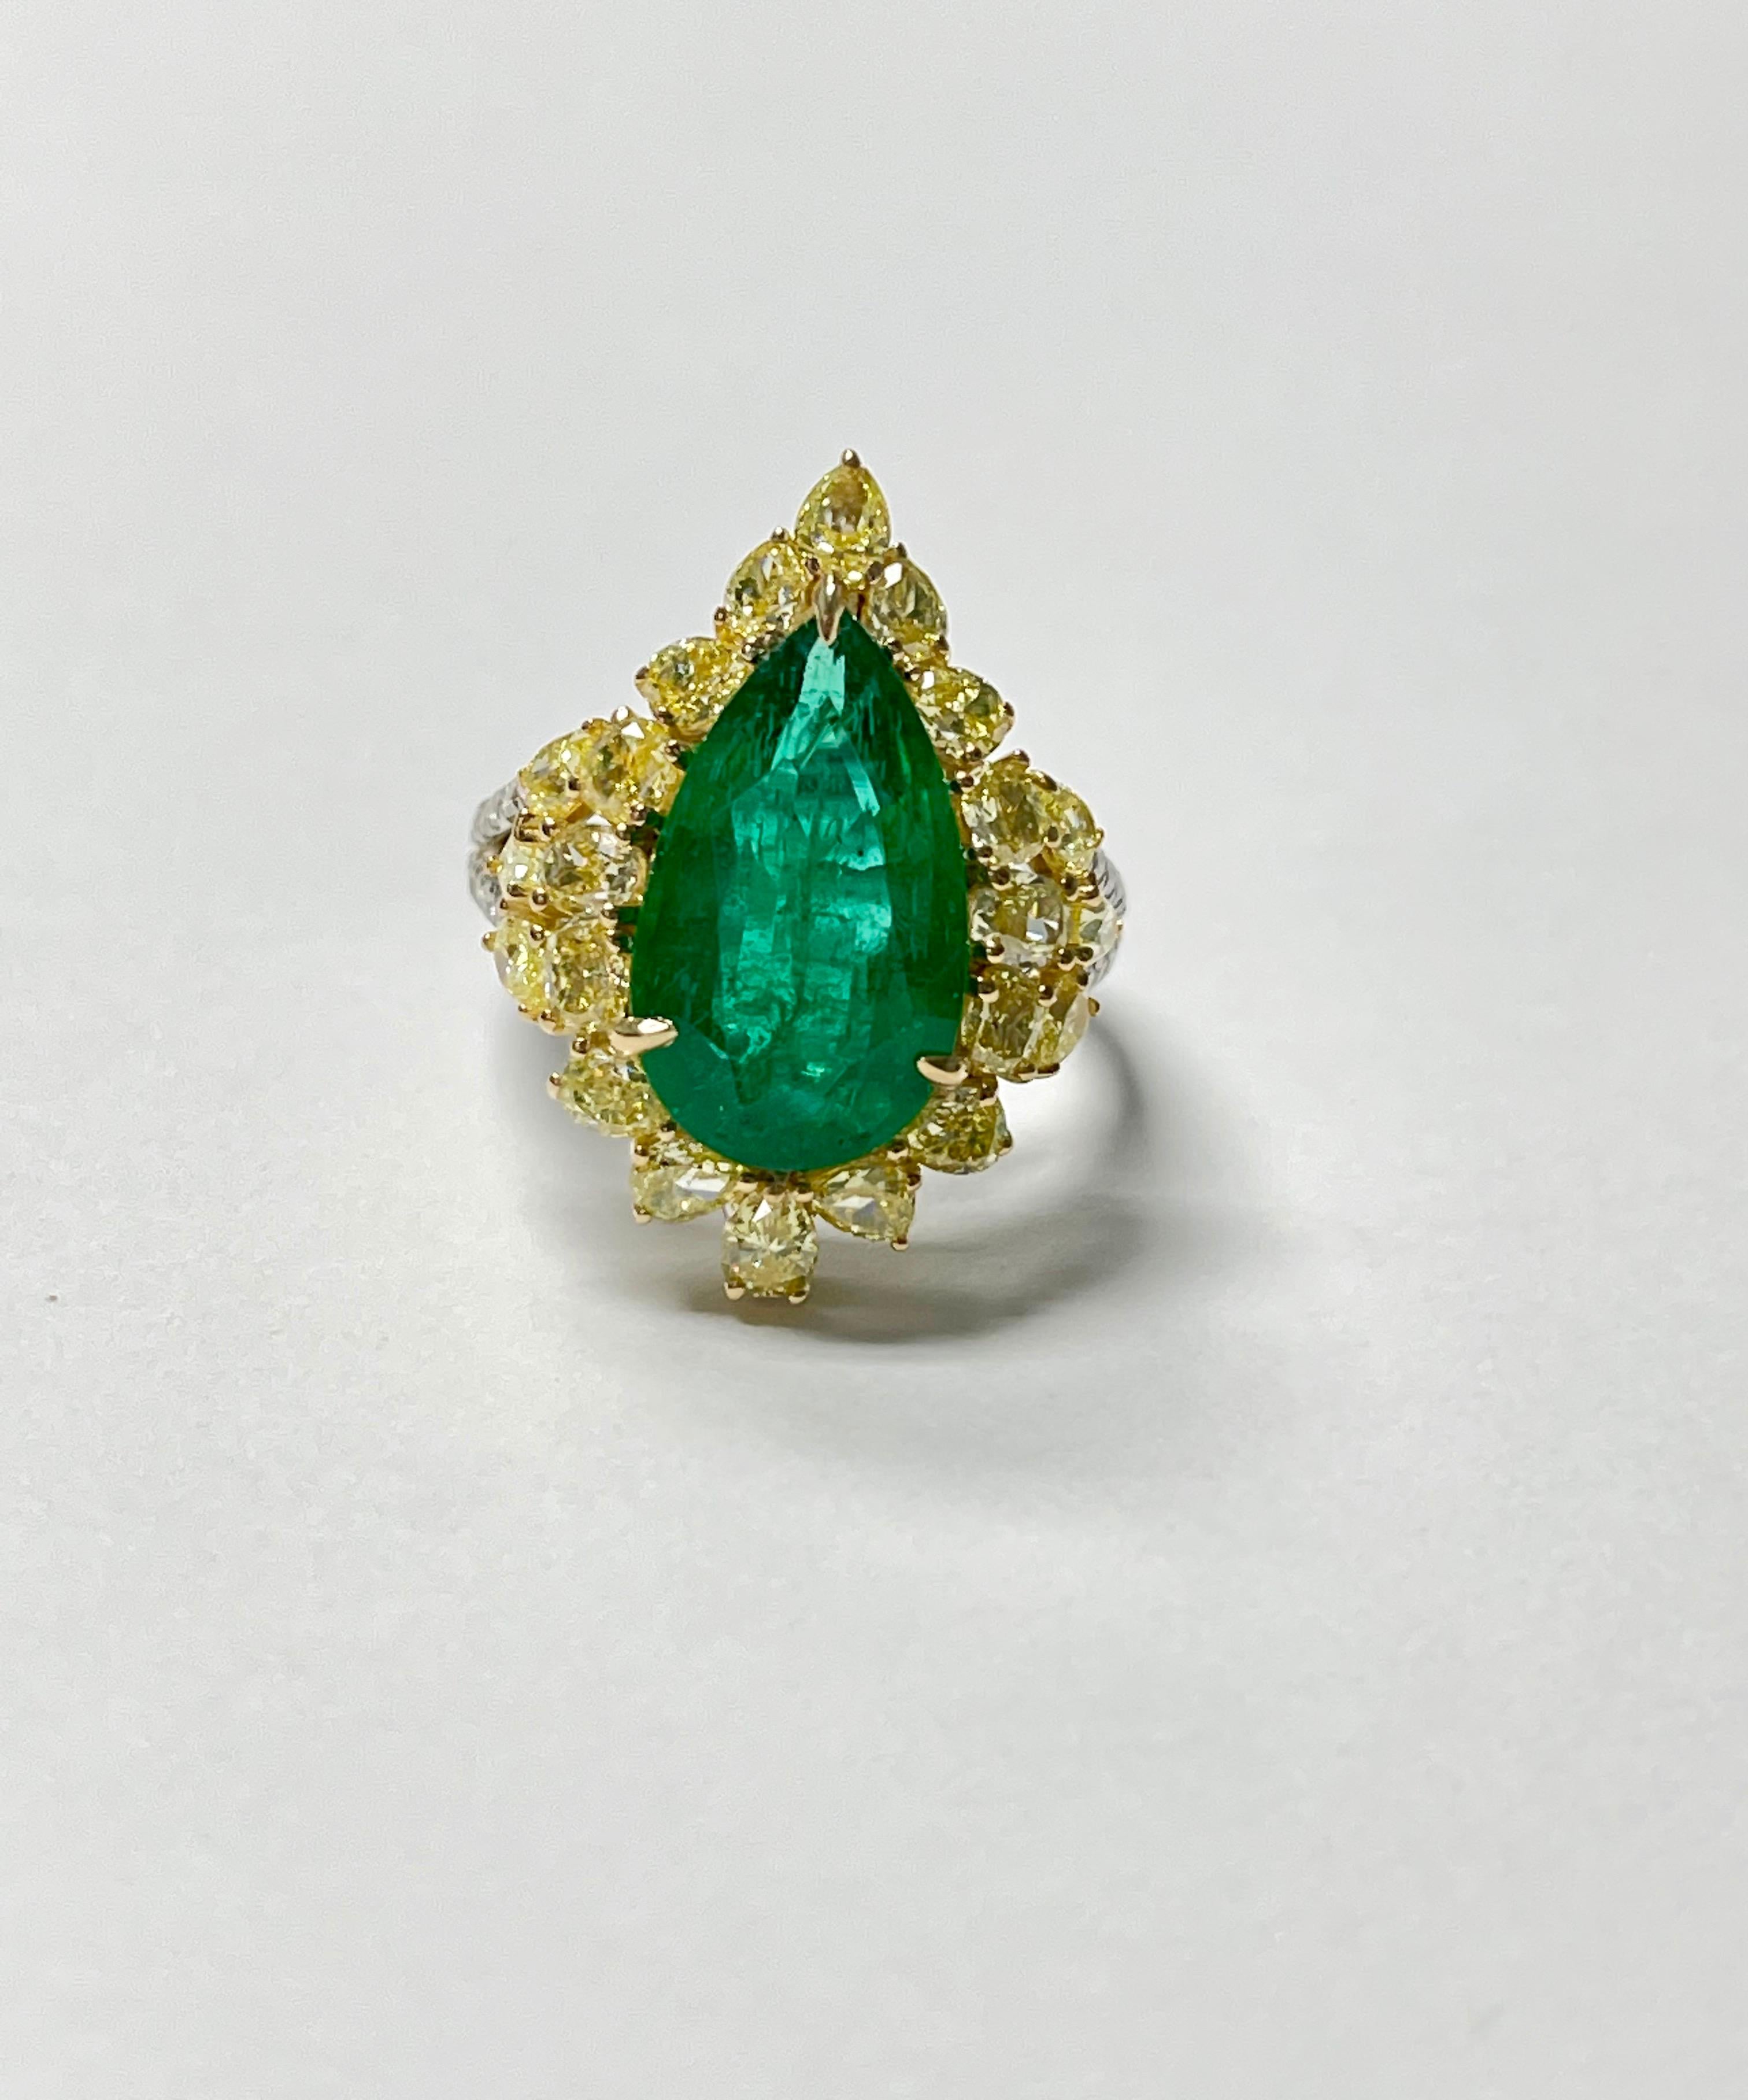 Gorgeous Pear Shape Emerald and yellow diamond engagement ring beautifully handmade in 18k yellow and white gold. 
The details are as follows : 
Pear shape emerald weight : 2.37 carat 
Fancy yellow diamond weight : 3.08 carat 
Metal : 18 k yellow